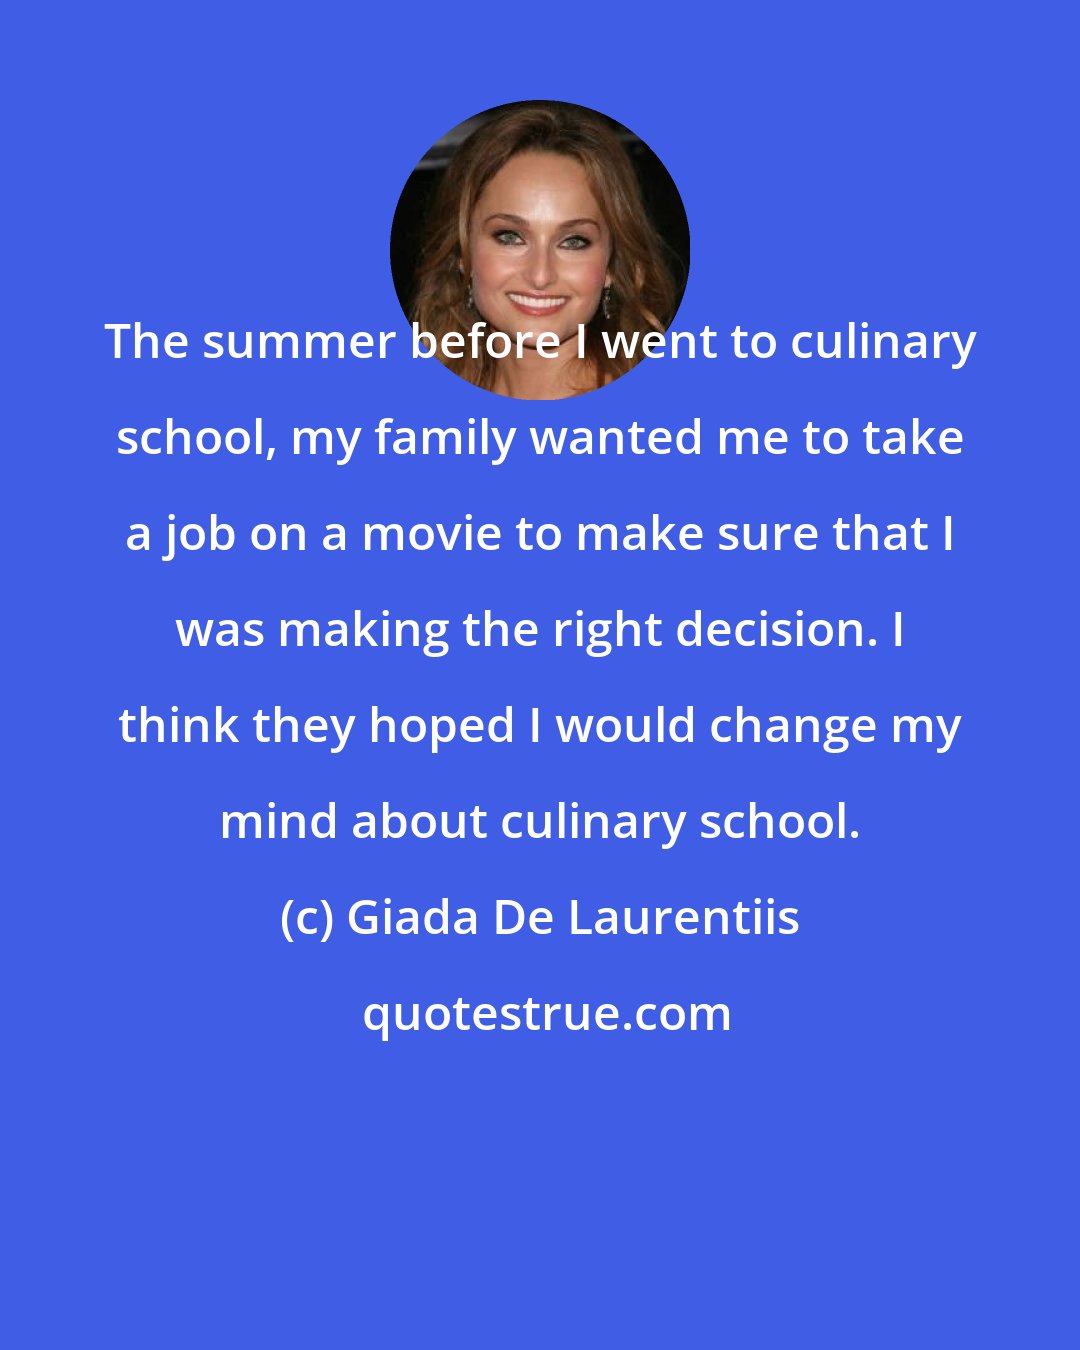 Giada De Laurentiis: The summer before I went to culinary school, my family wanted me to take a job on a movie to make sure that I was making the right decision. I think they hoped I would change my mind about culinary school.